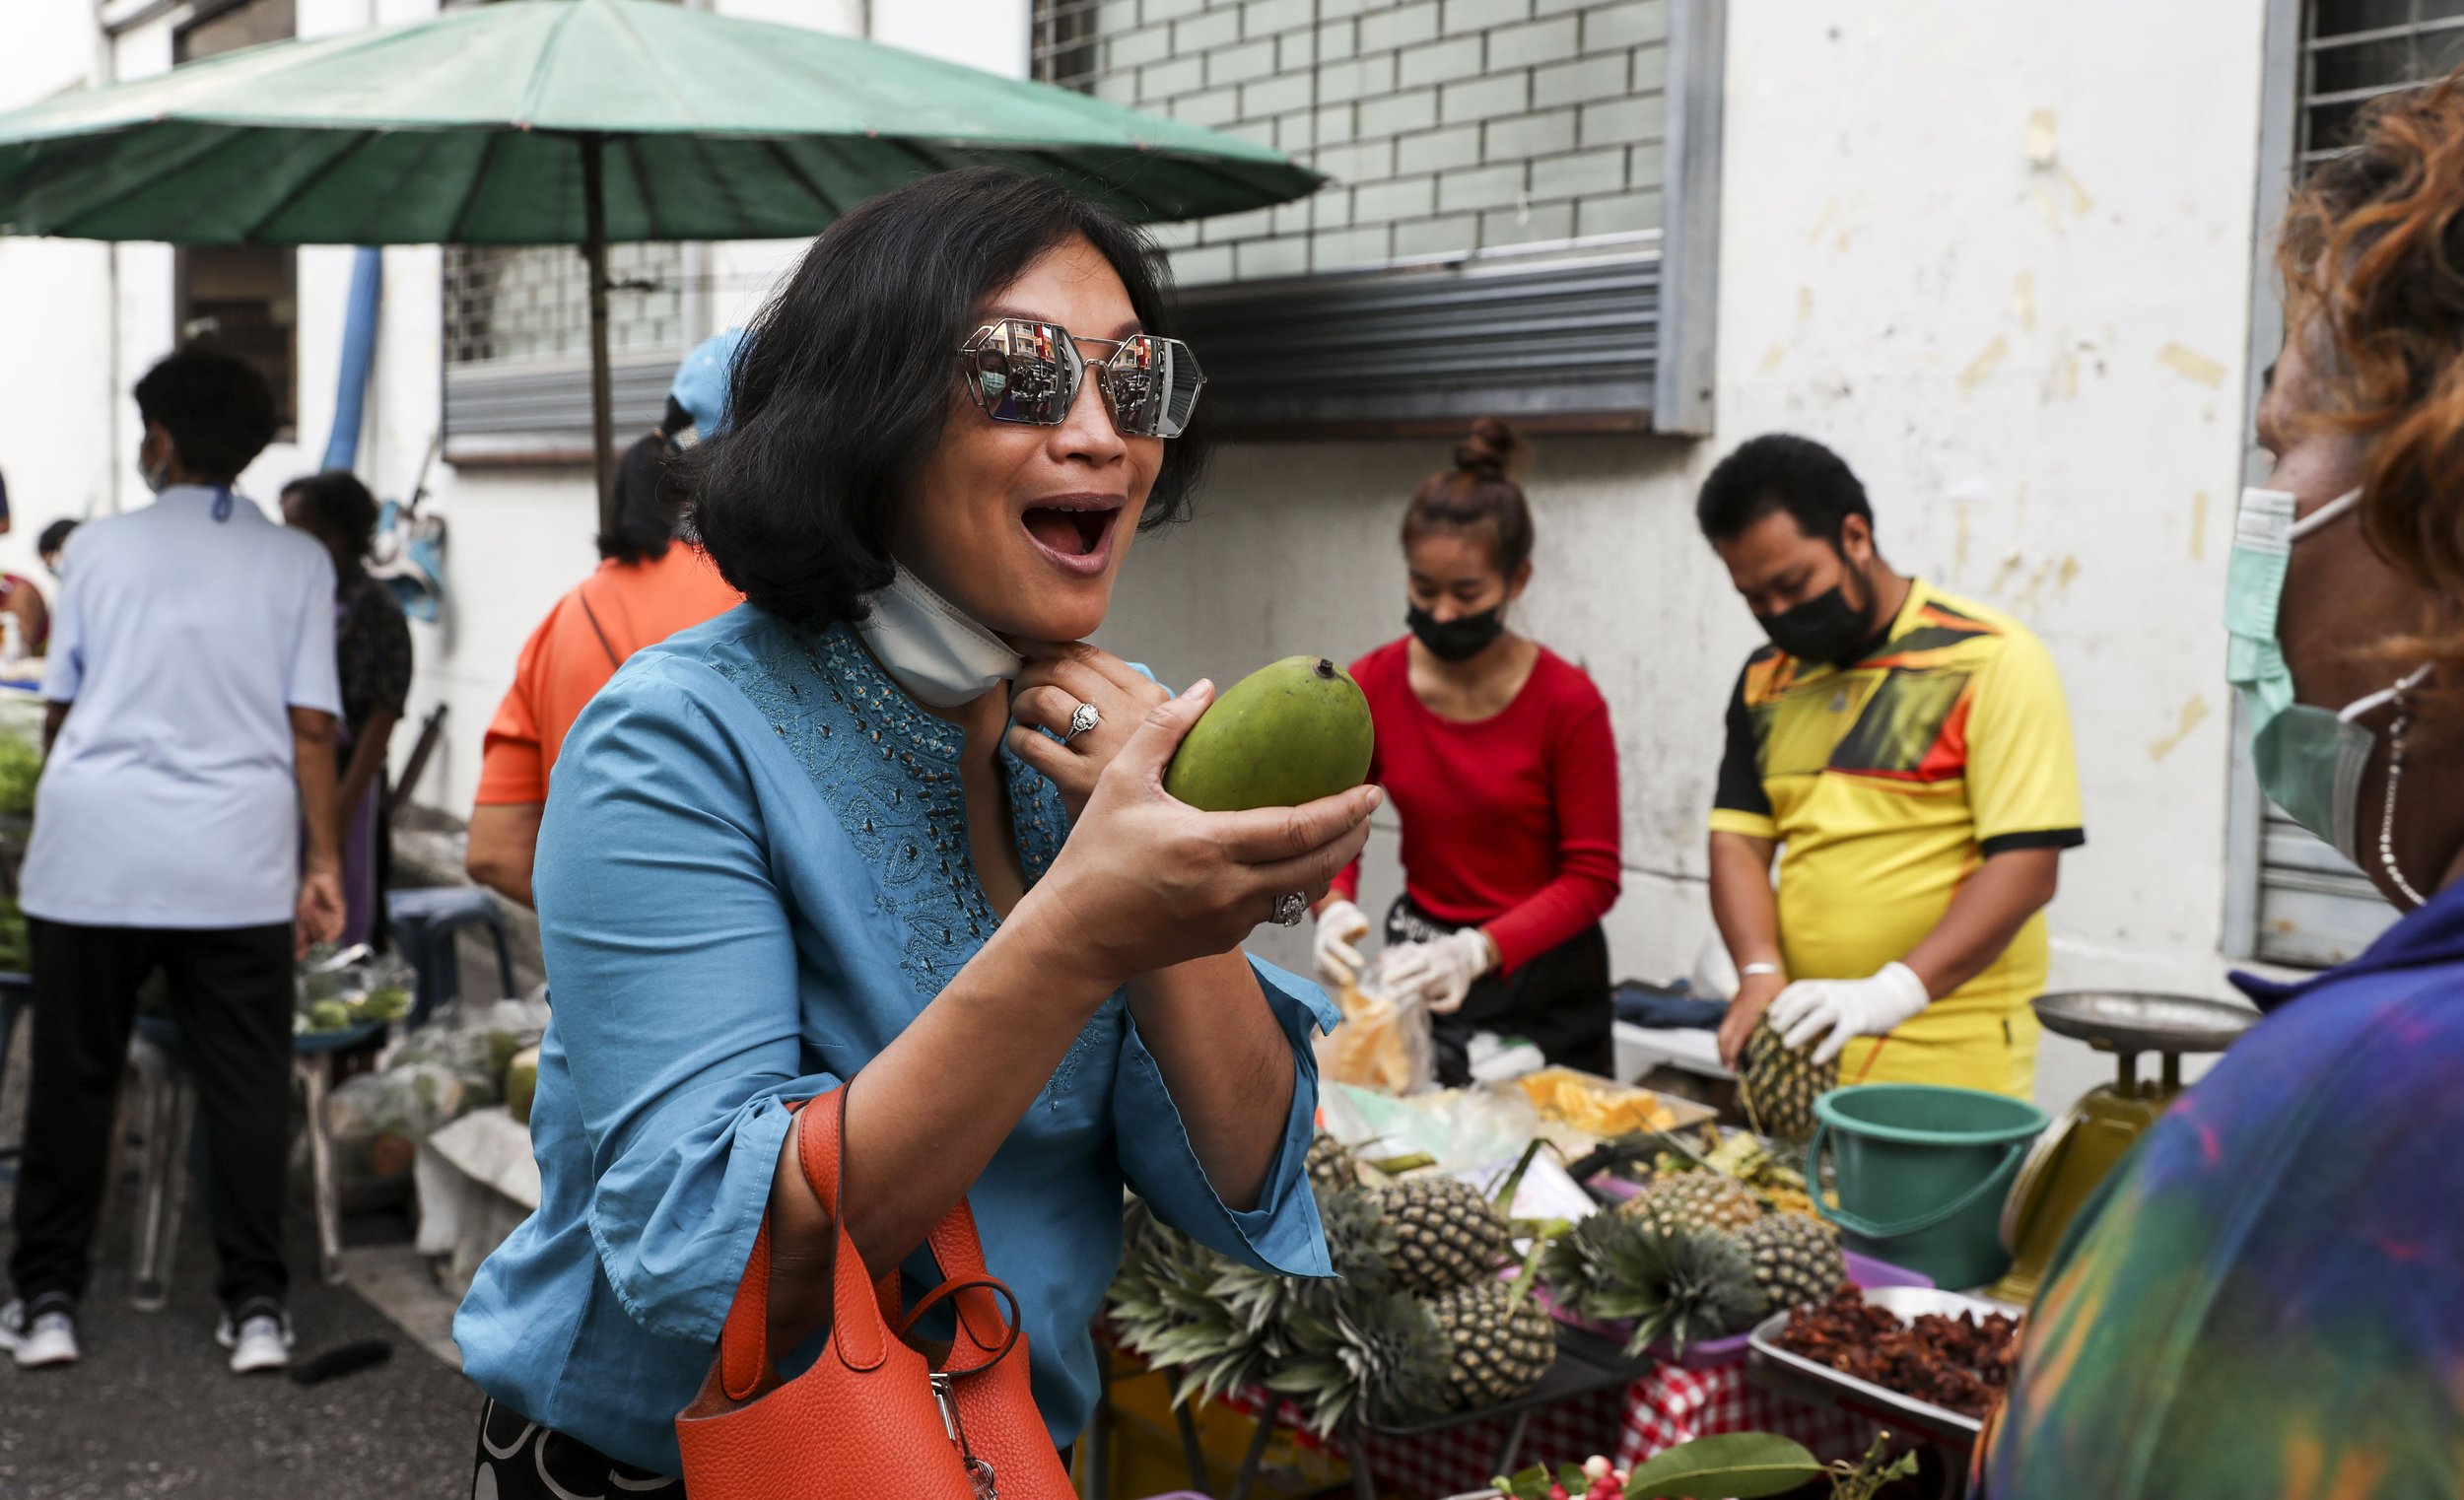  Chutatip “Nok” Suntaranon reacts to a fragrant mango at the market in Trang, Thailand on Saturday, April 16, 2022. "I've been away from home for a very long time," Nok said. "In order for me to be able to present it in a very correct way... I need t